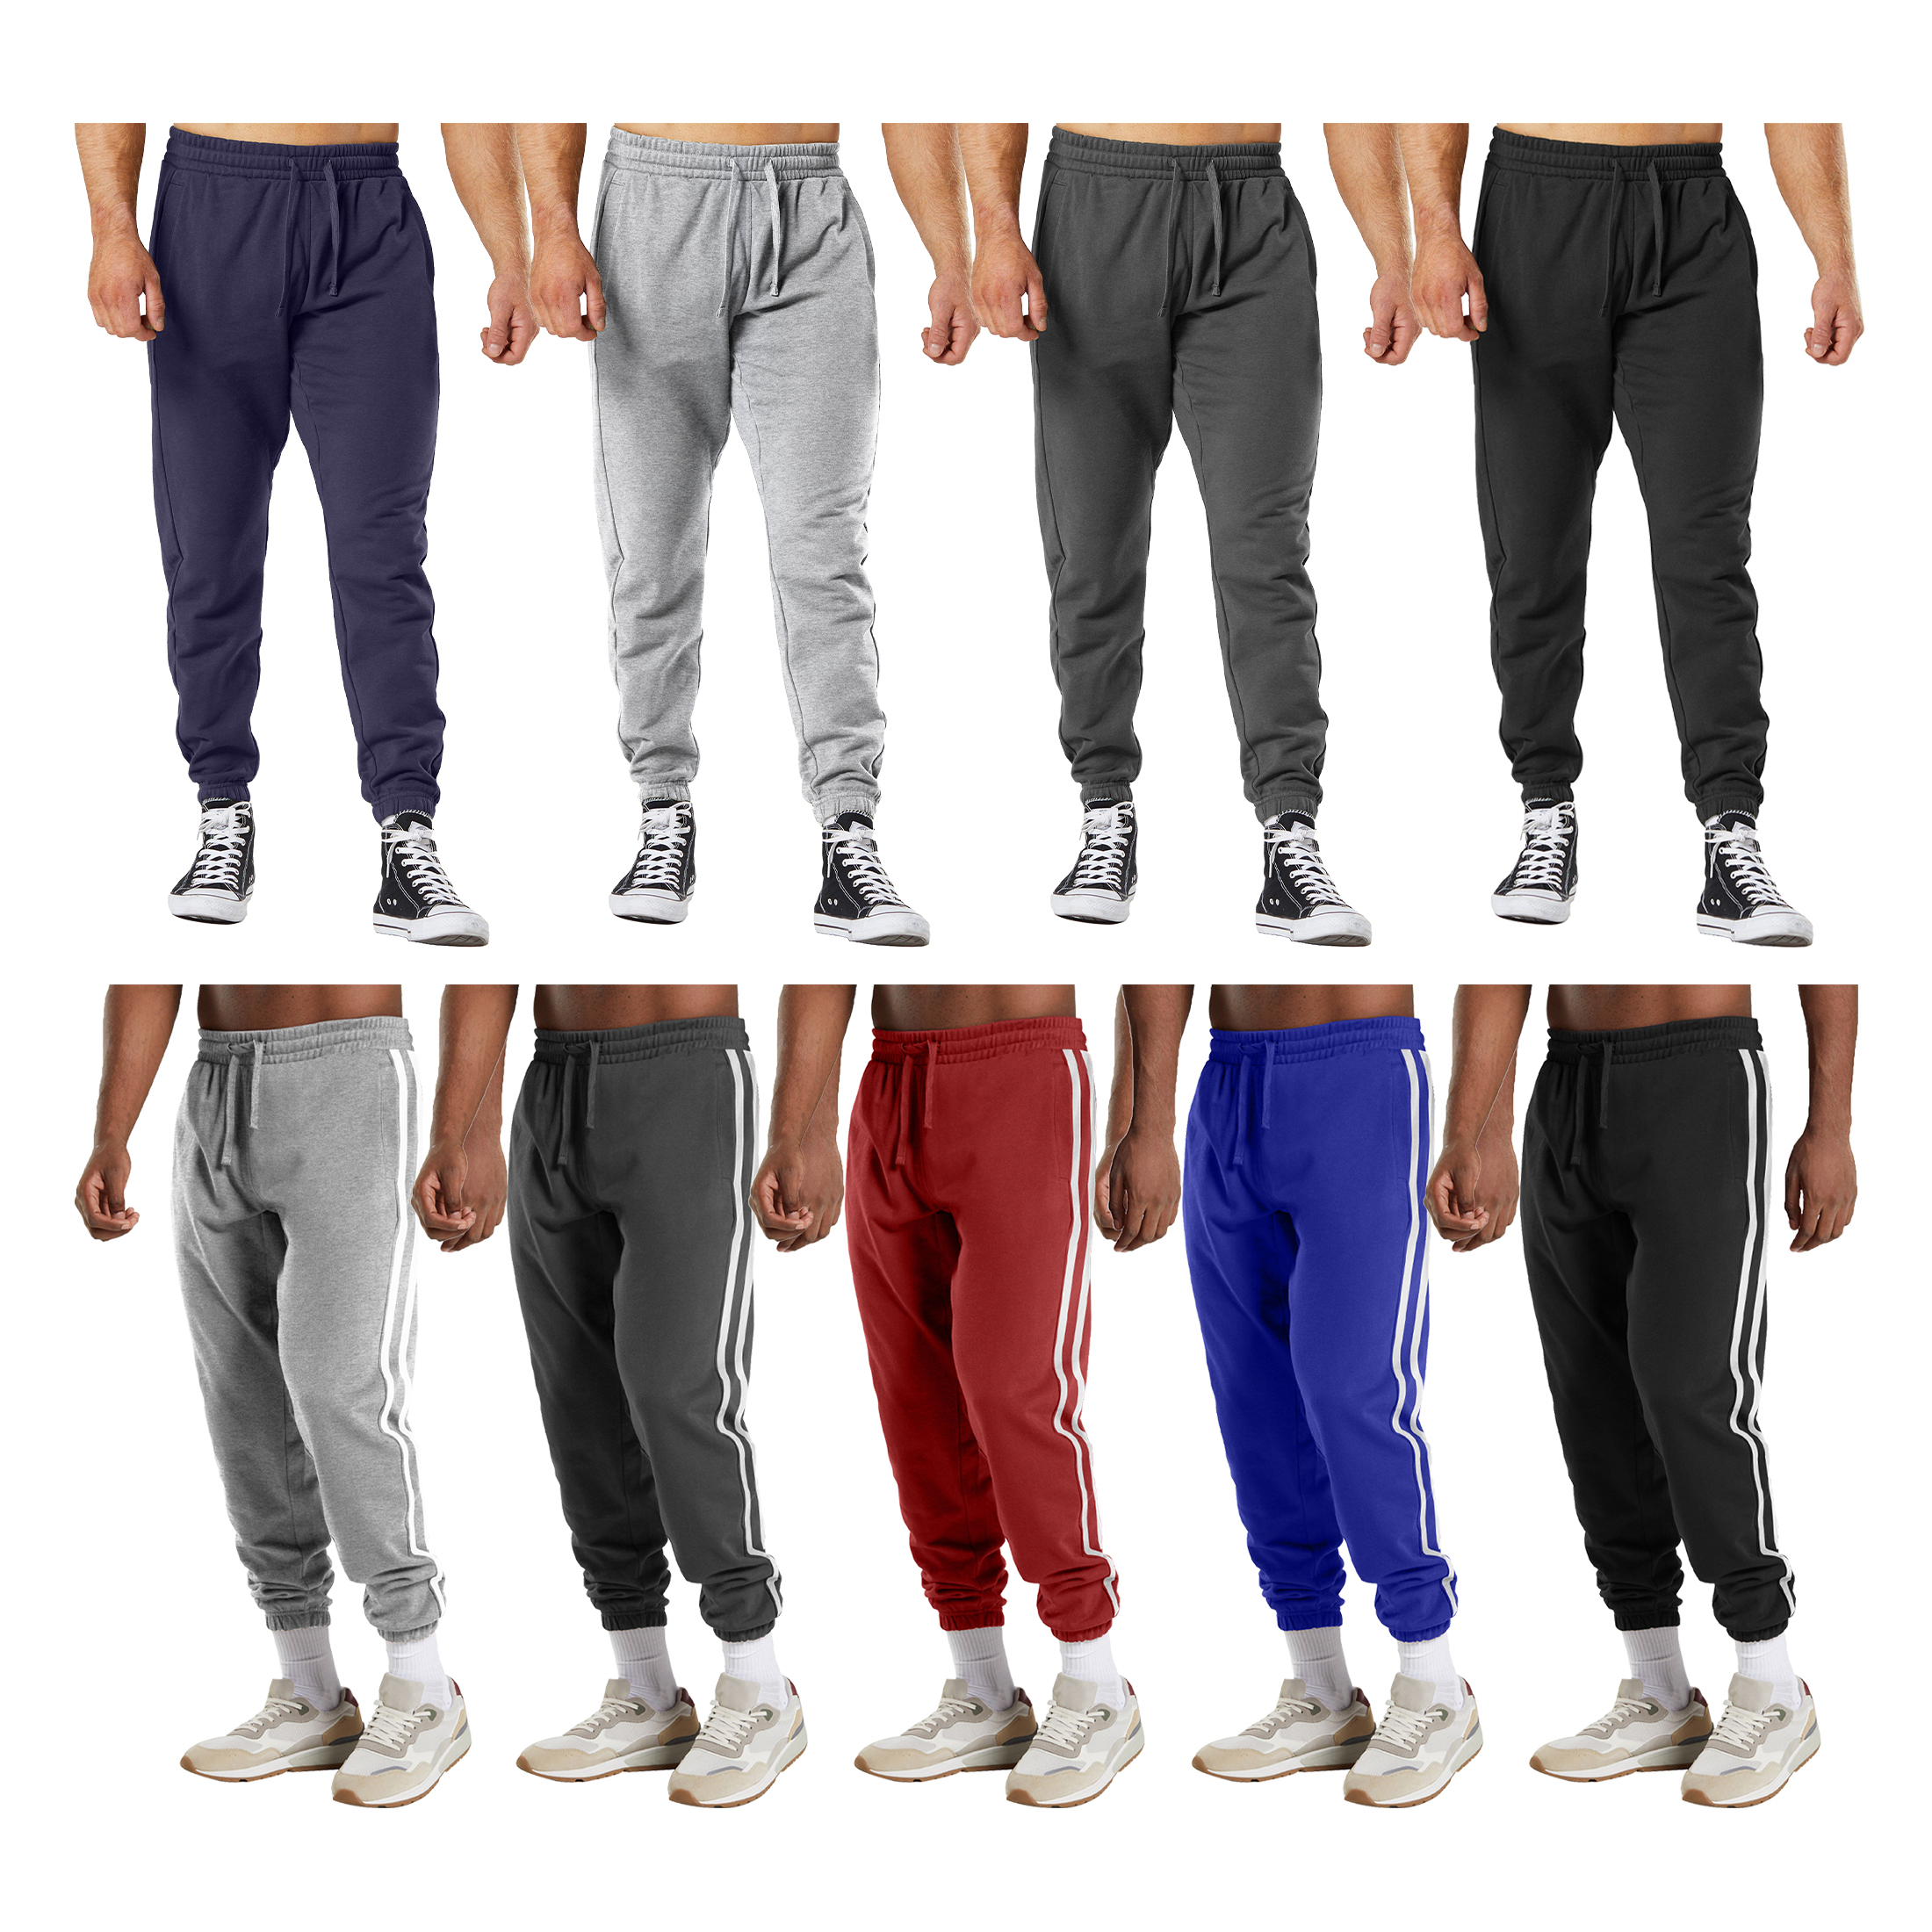 3-Pack: Men's Casual Fleece-Lined Elastic Bottom Sweatpants Jogger Pants With Pockets - Solid & Stripes, X-Large